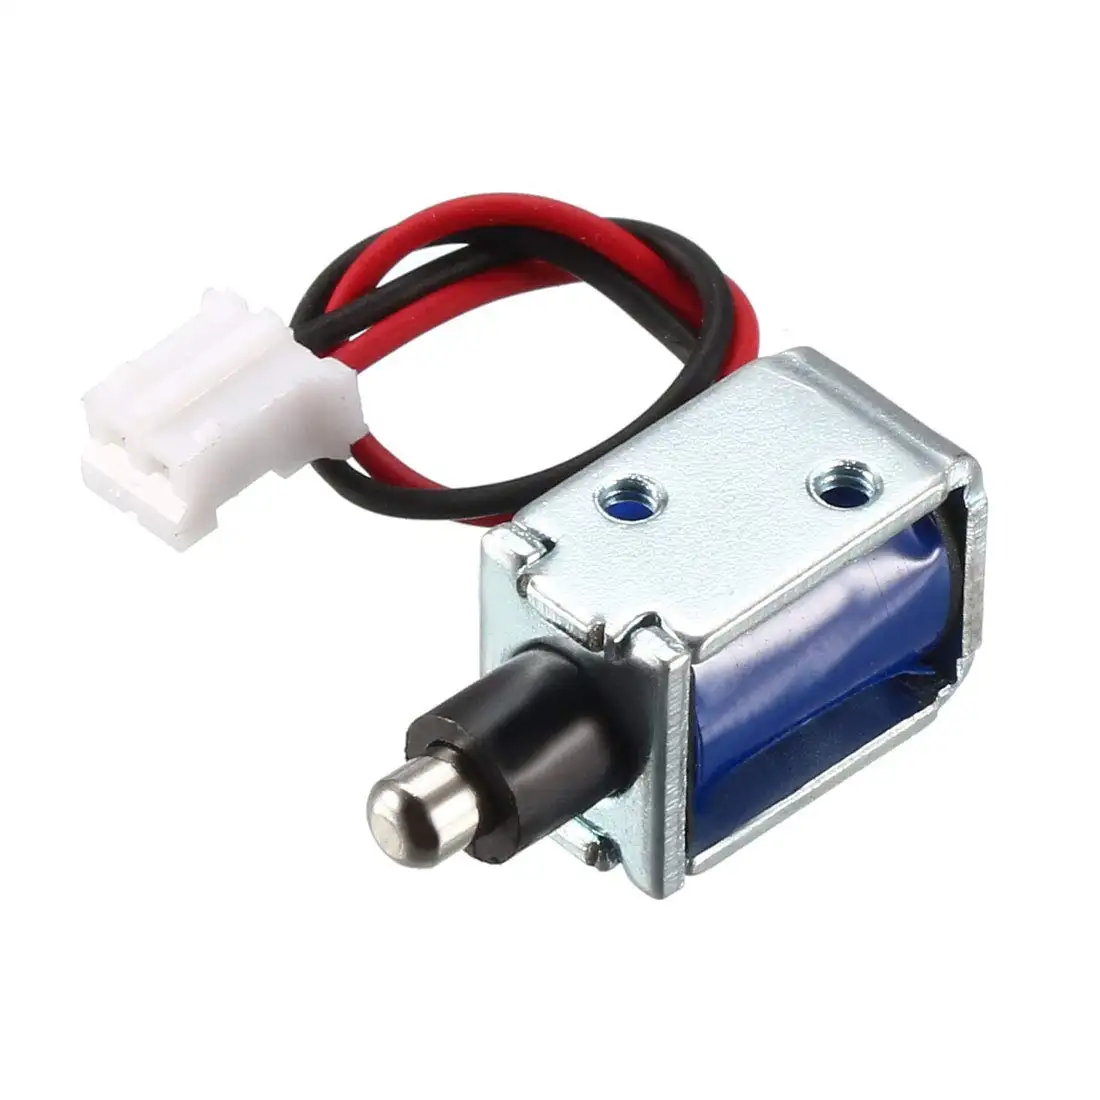 LY-011A DC5V 1A 30g 3mm Mini Electromagnetic Solenoid Lock Pull Type for Electric Lock Cabinet Door Lock